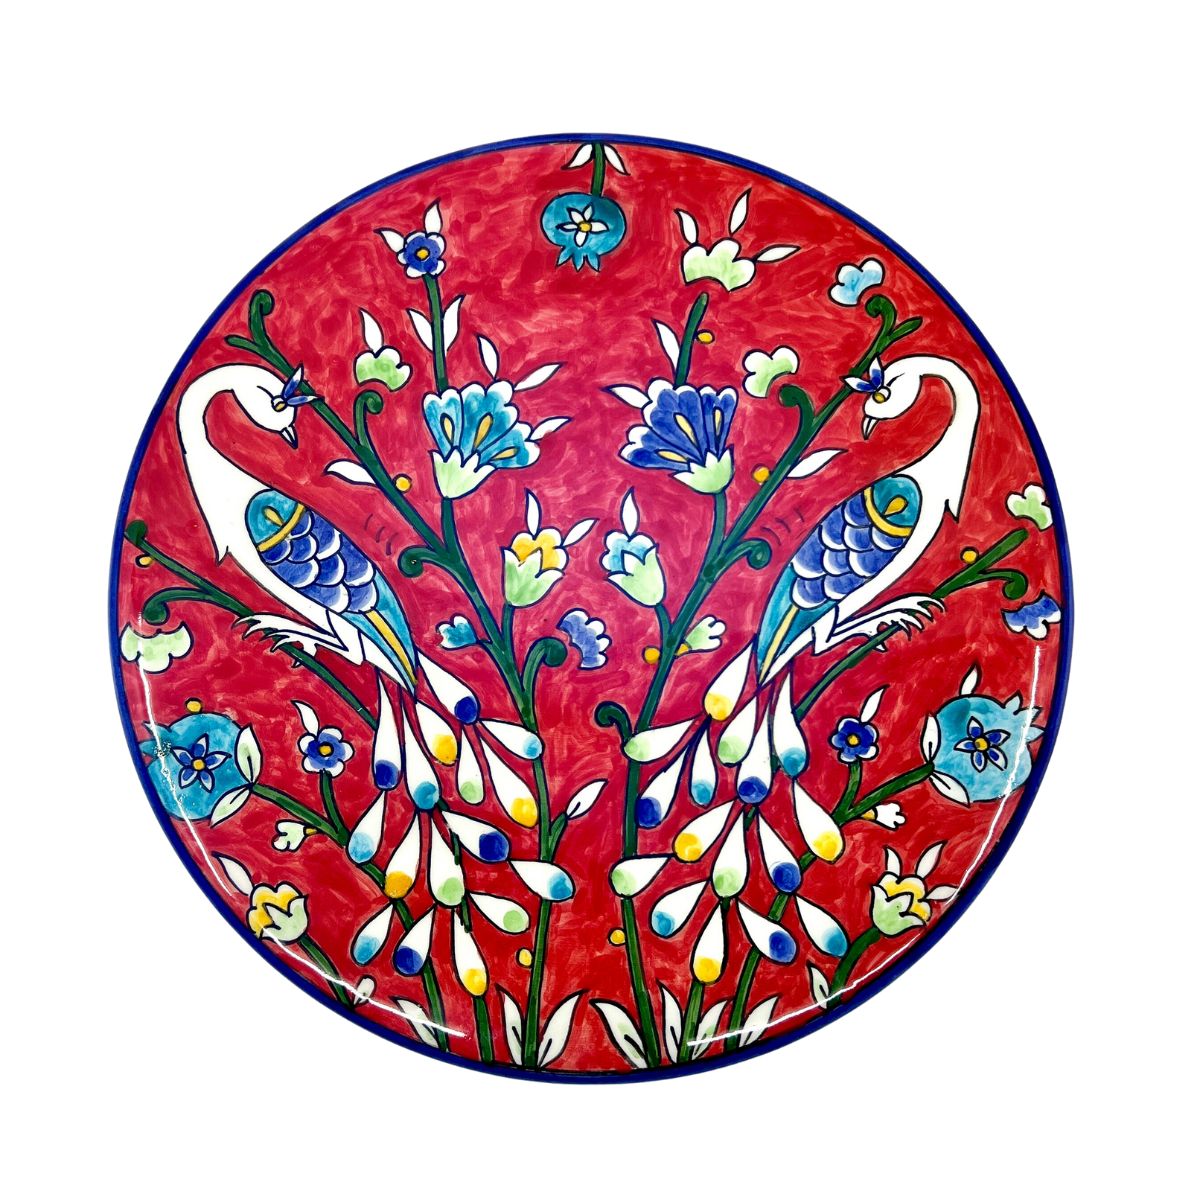 Ceramic Serving Plate (11 inches) - Red Birds